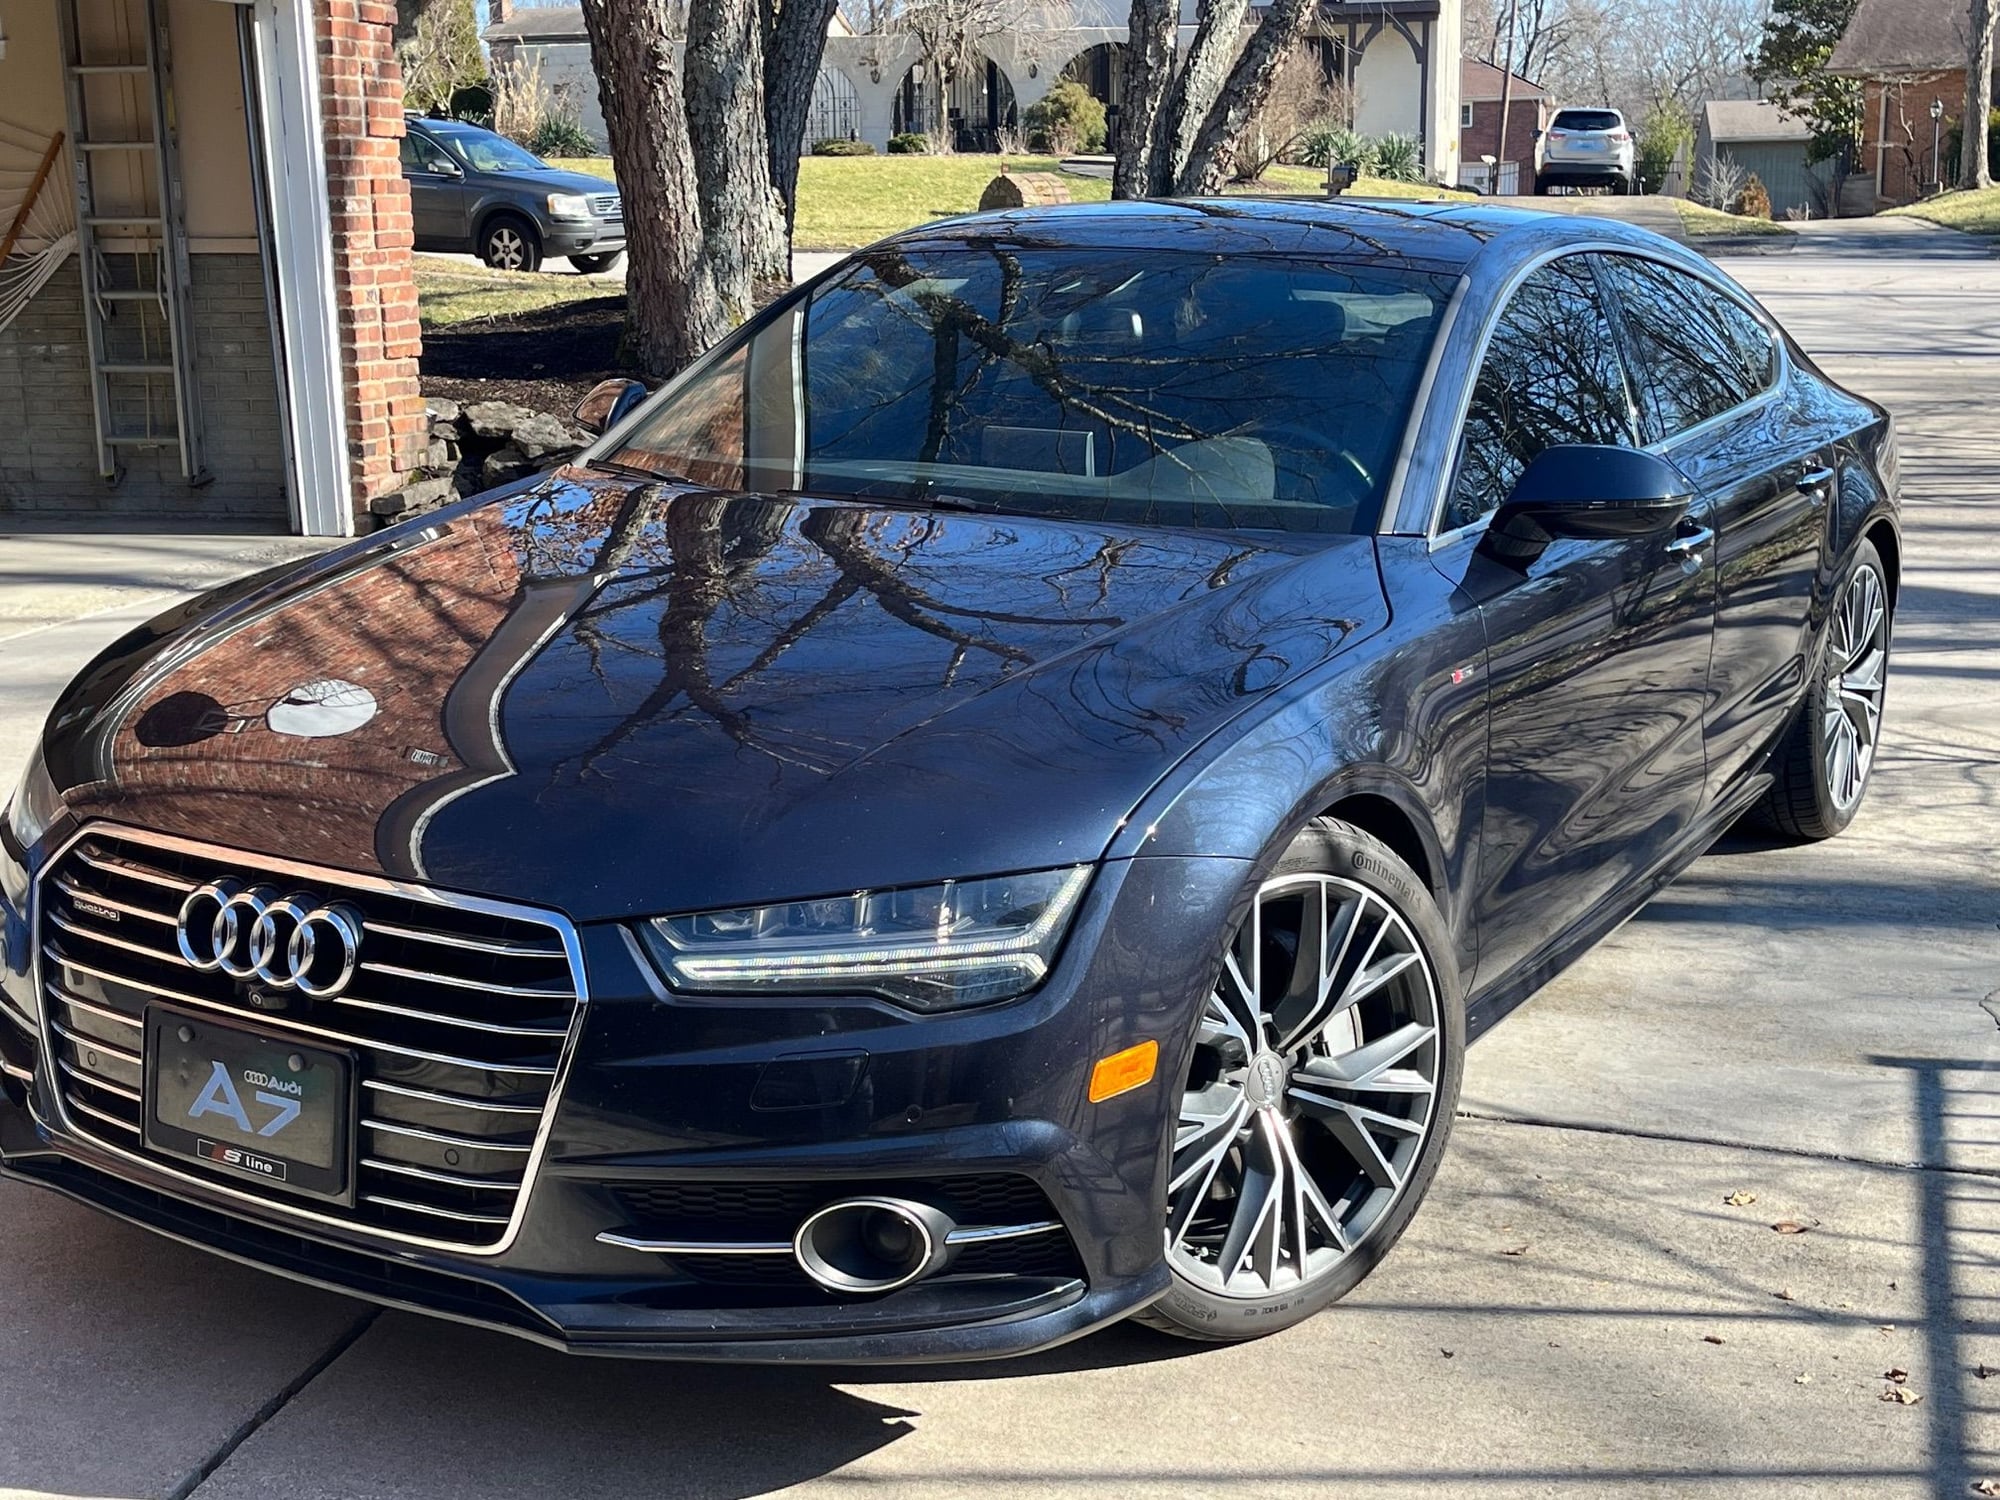 2016 Audi A7 Quattro - 2016 Audi A7 TDI Premium Plus - one of the last sold new in the USA - Used - Lexington, KY 40502, United States